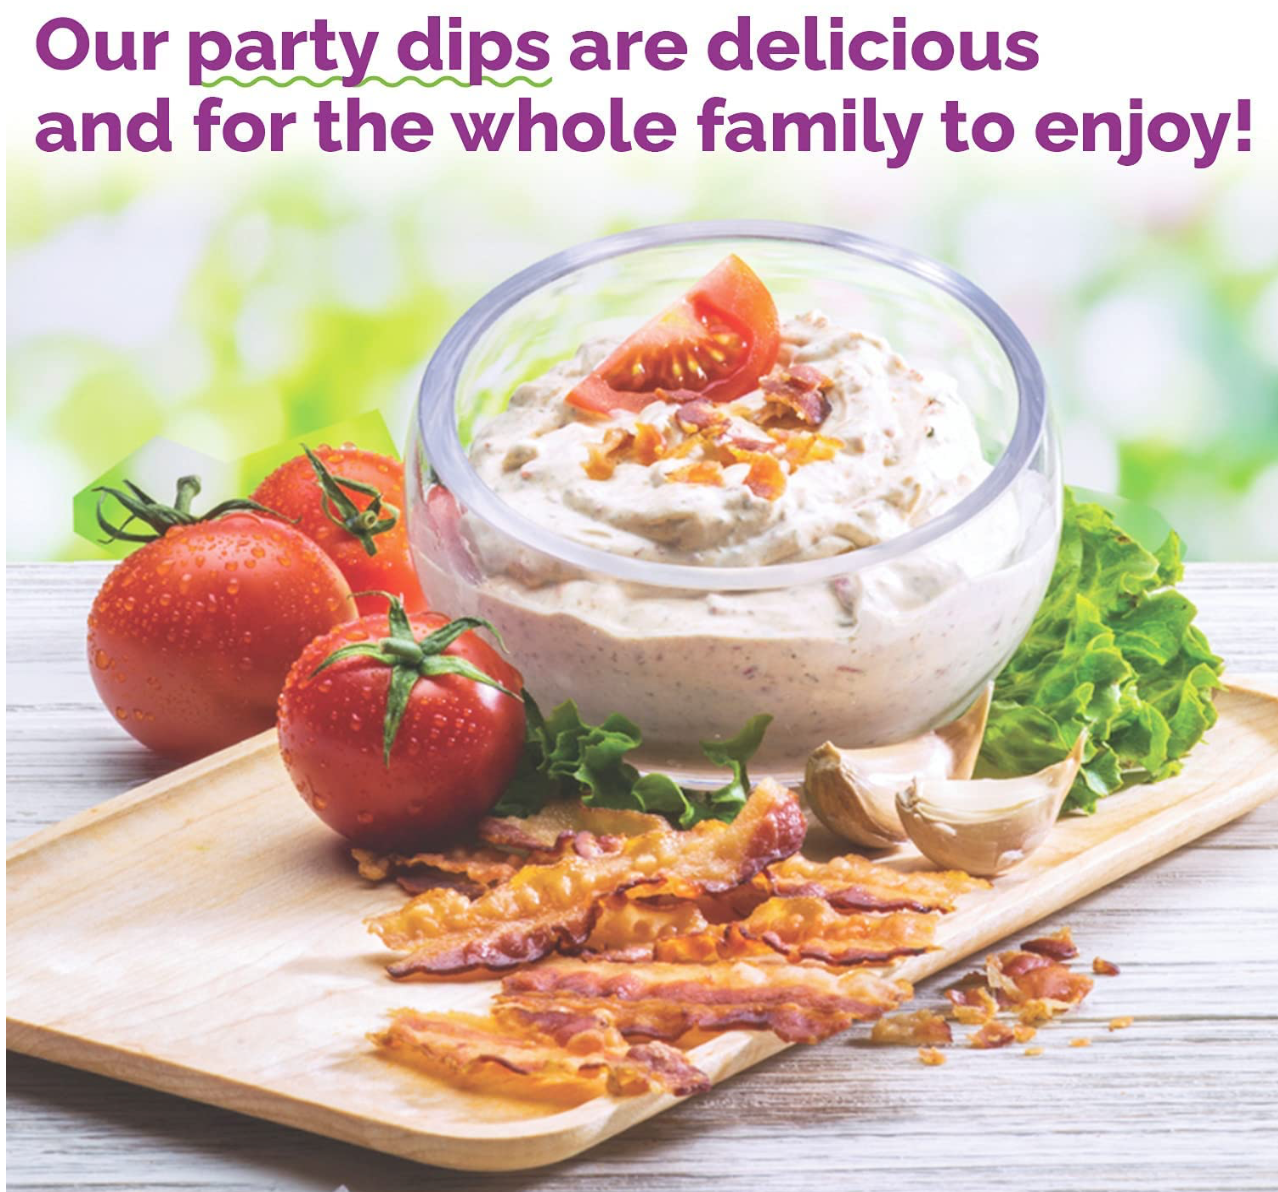 Our party dips are delicious and for the whole family to enjoy!